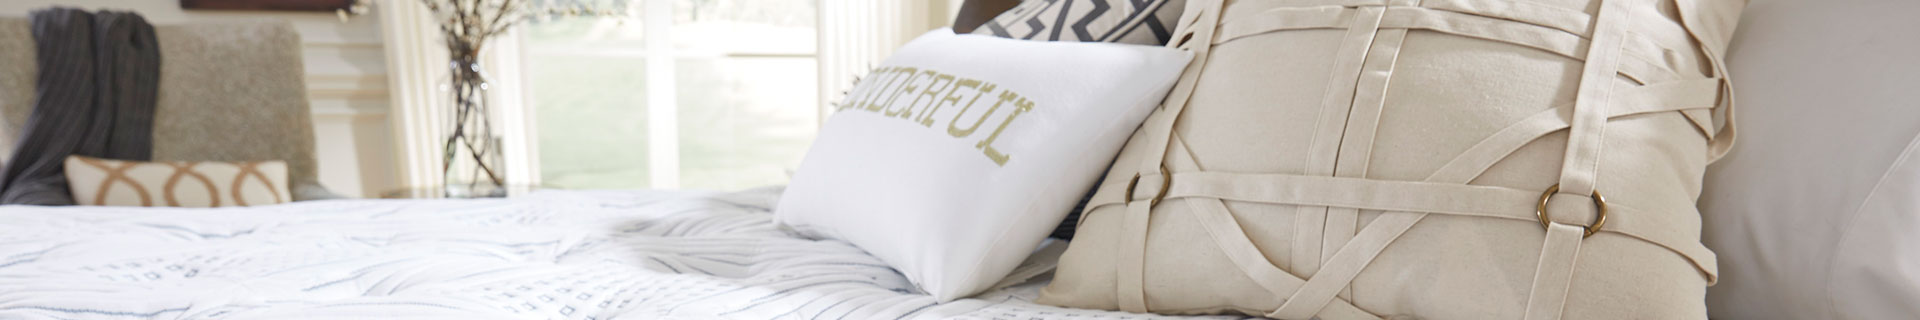 Bed with throw pillow.